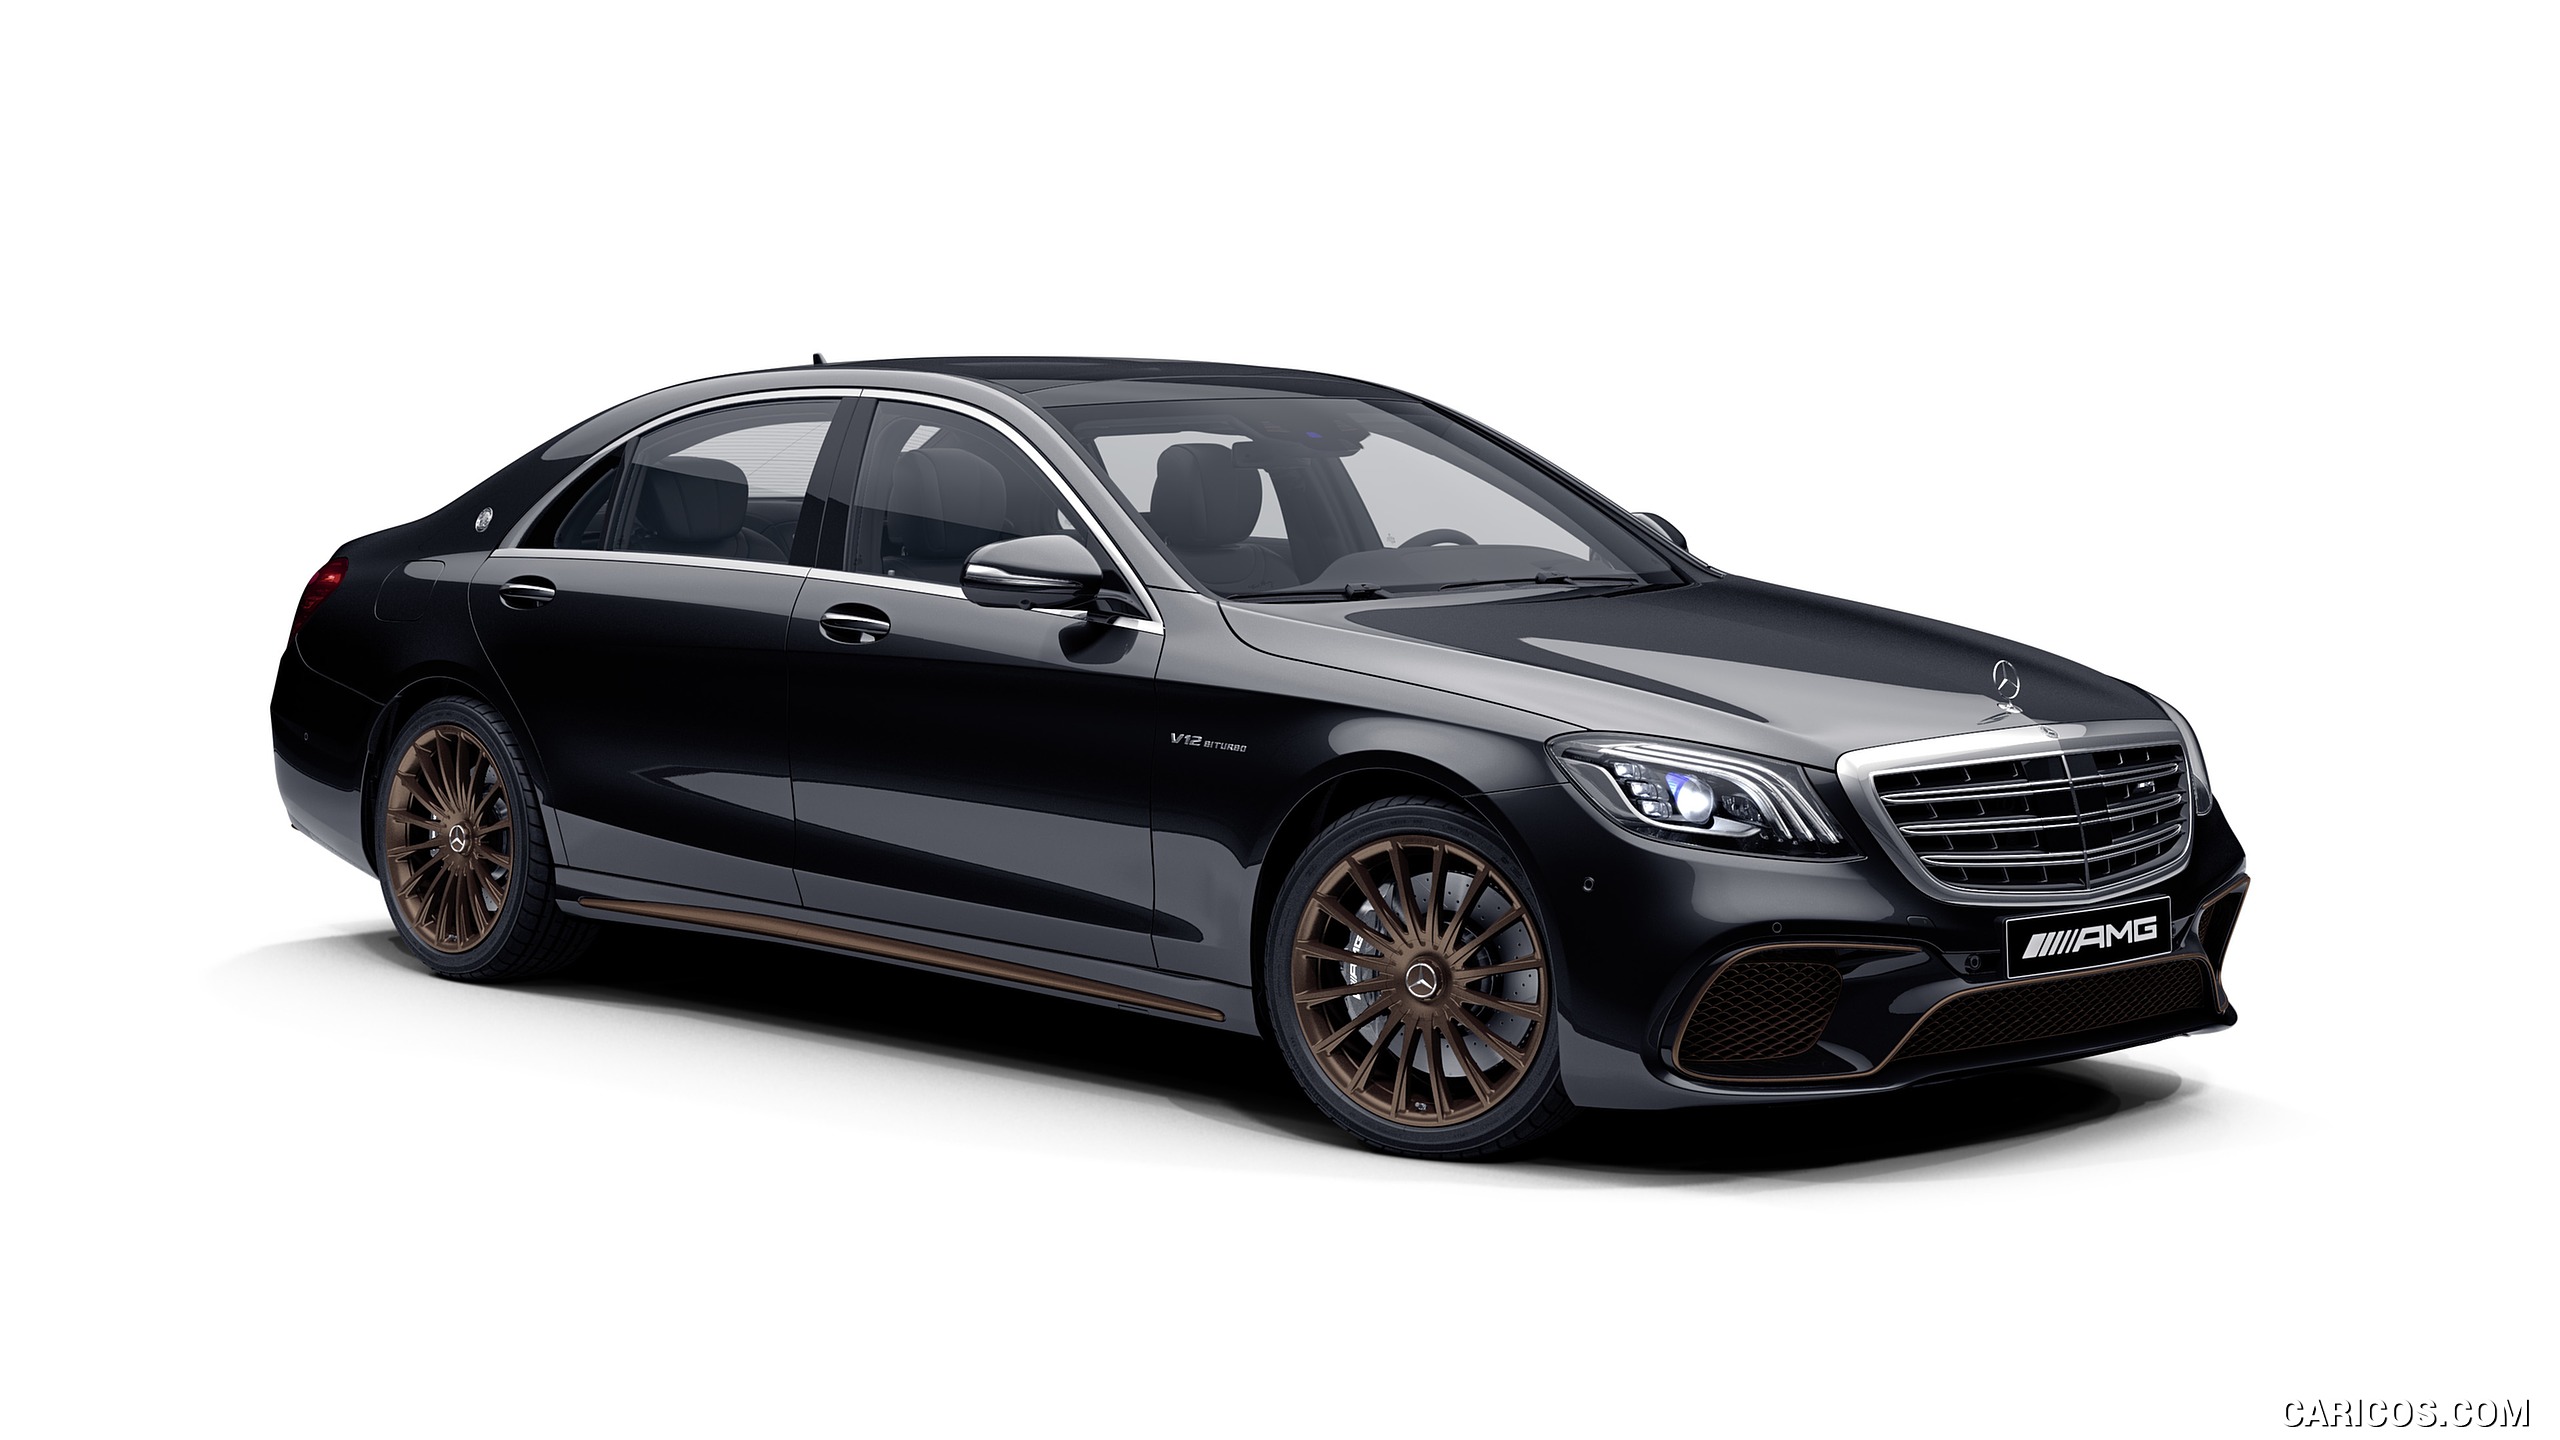 2019 Mercedes-AMG S 65 Final Edition - Front Three-Quarter, #10 of 10